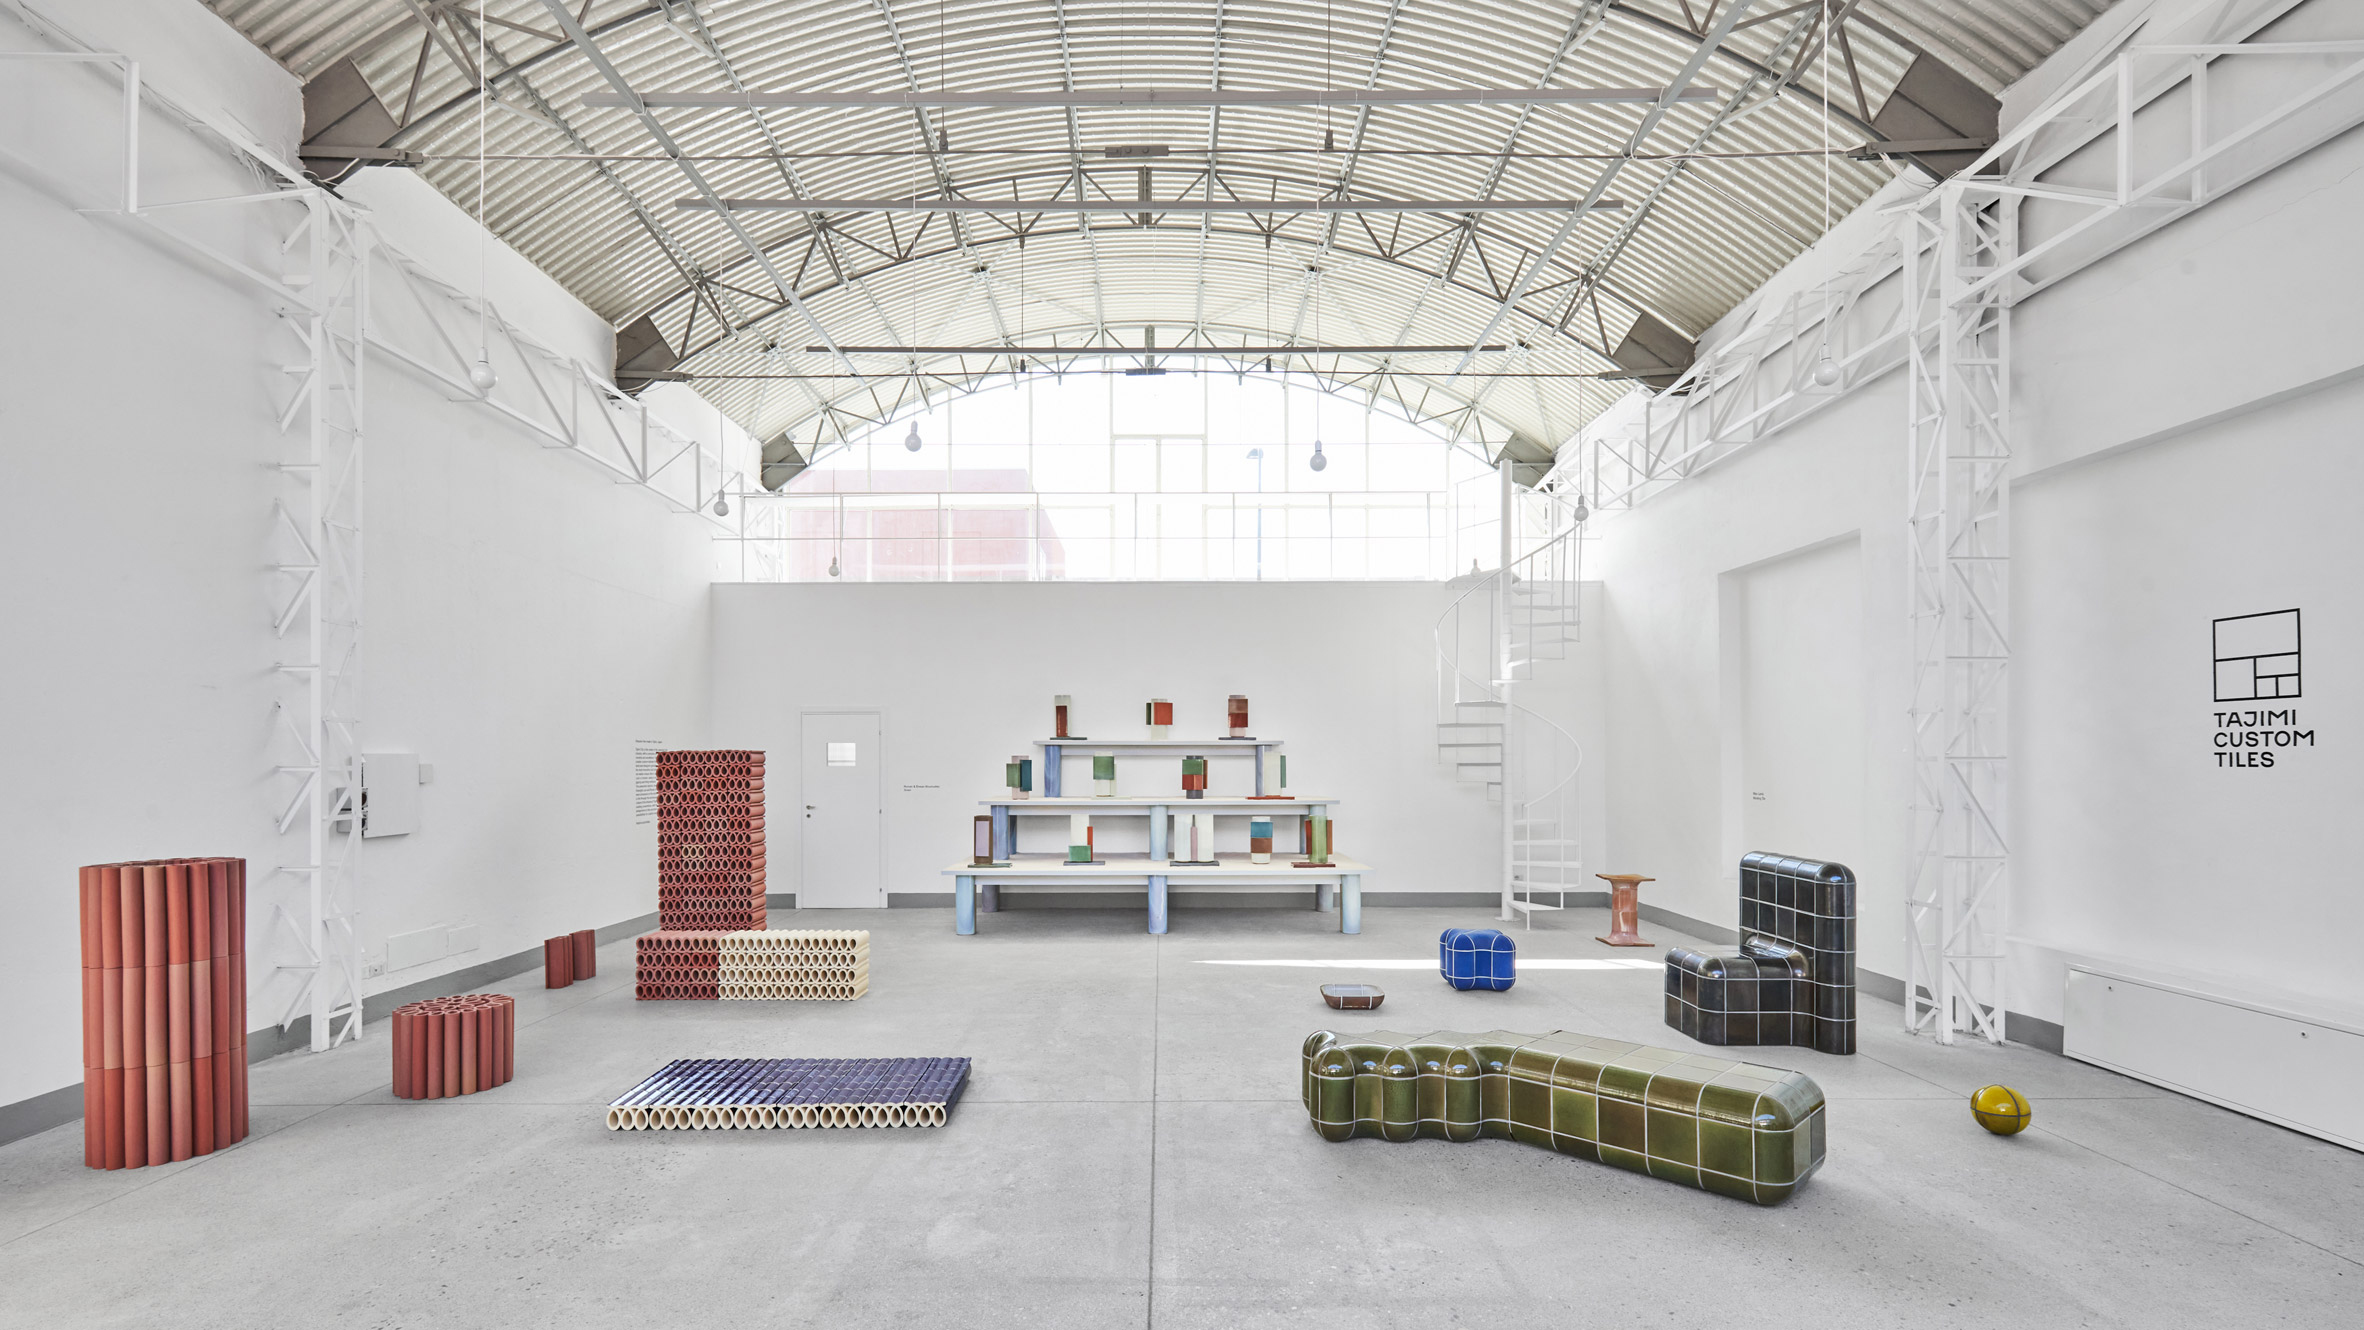 The installation of the Bouroullec brothers in Milan